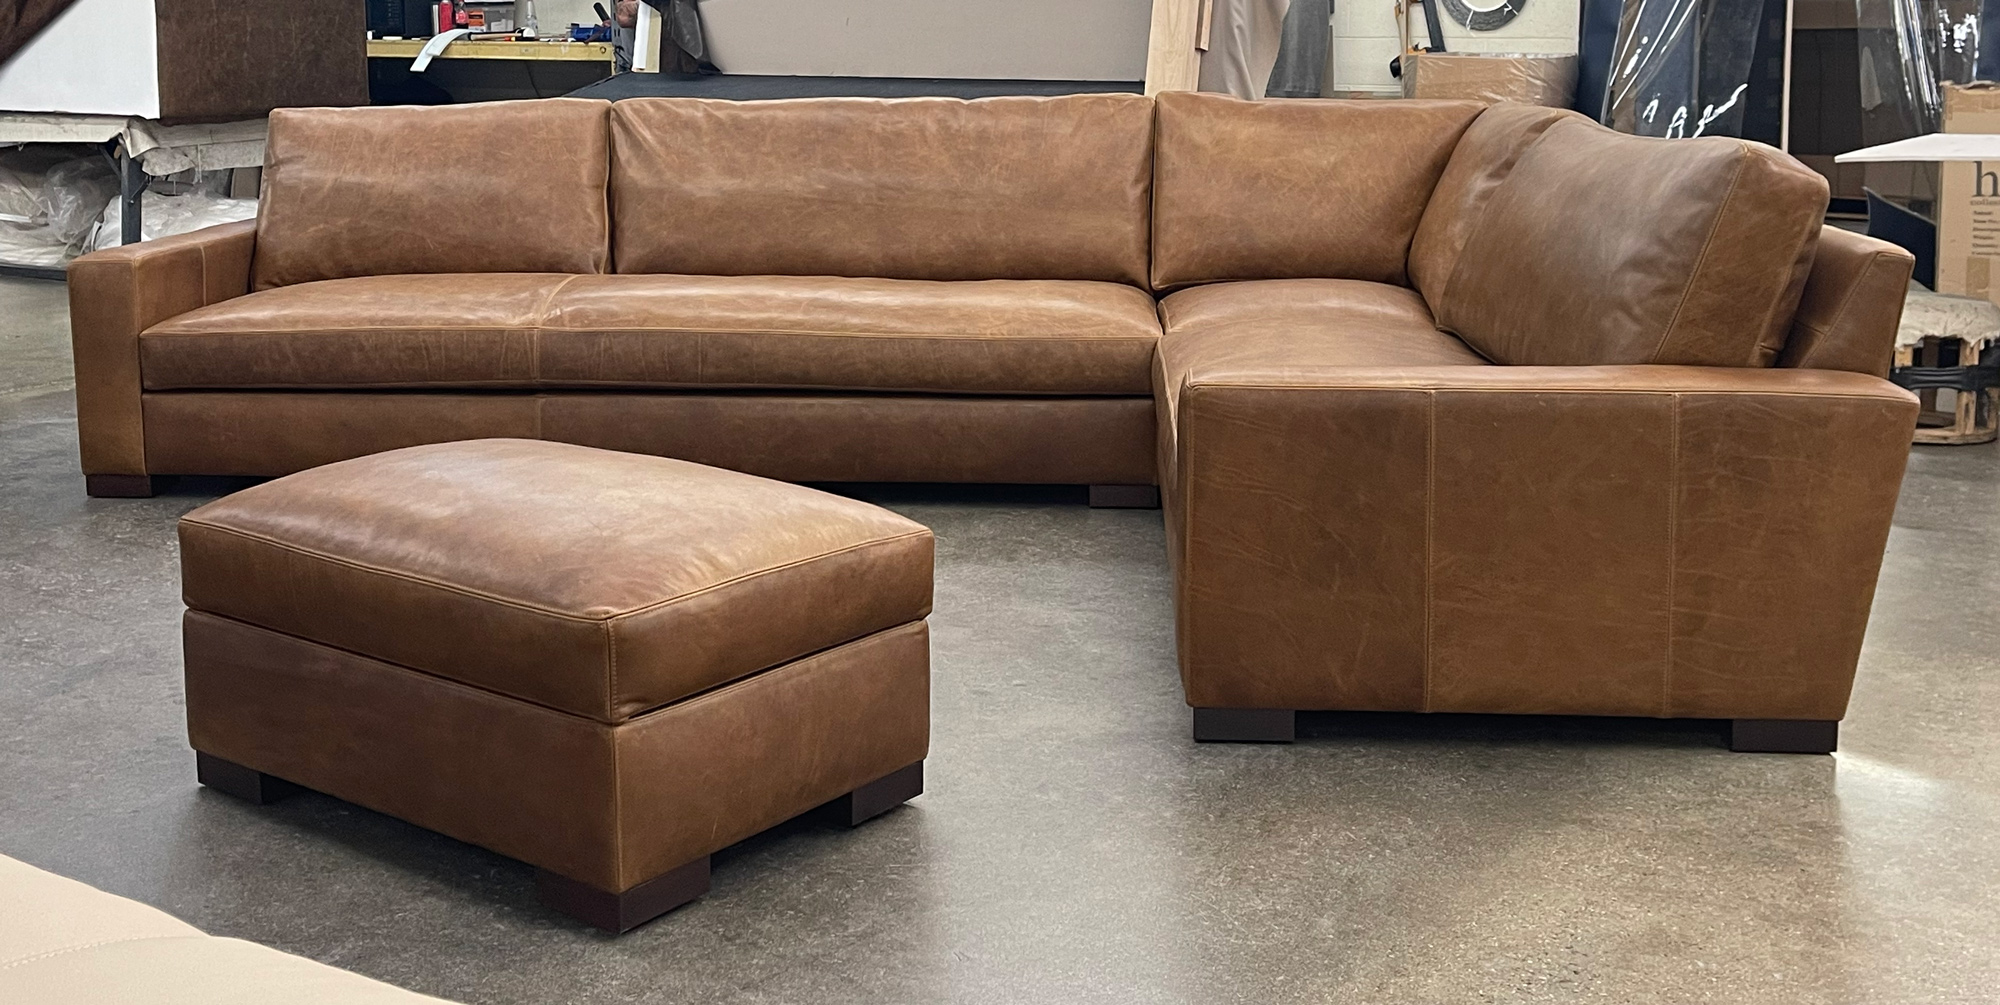 Custom Braxton L Sectional in Berkshire Tan Leather with matching Storage Ottoman - RAF side view